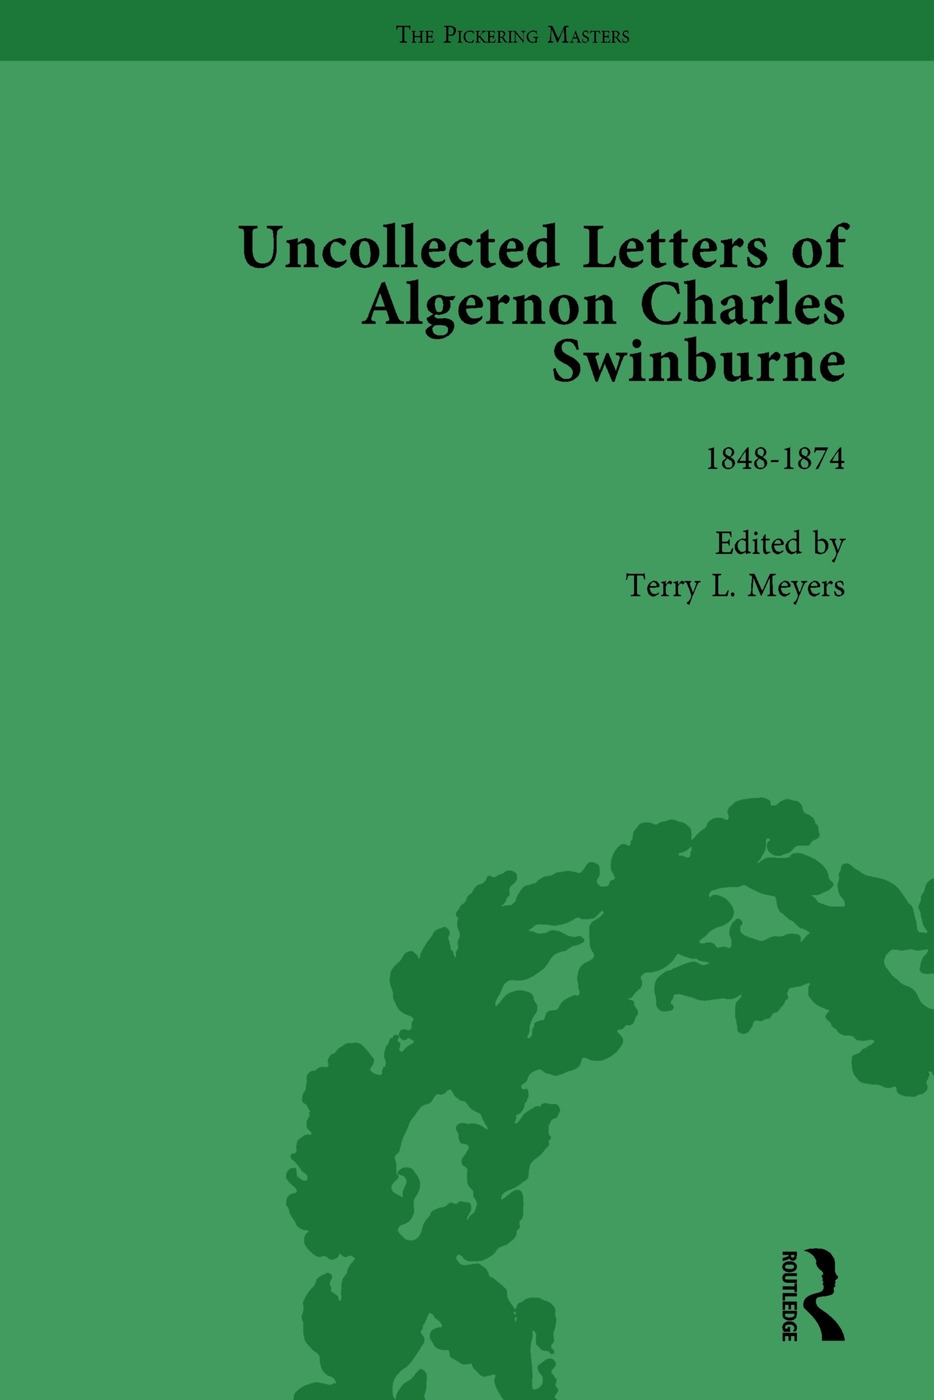 The Uncollected Letters of Algernon Charles Swinburne Vol 1